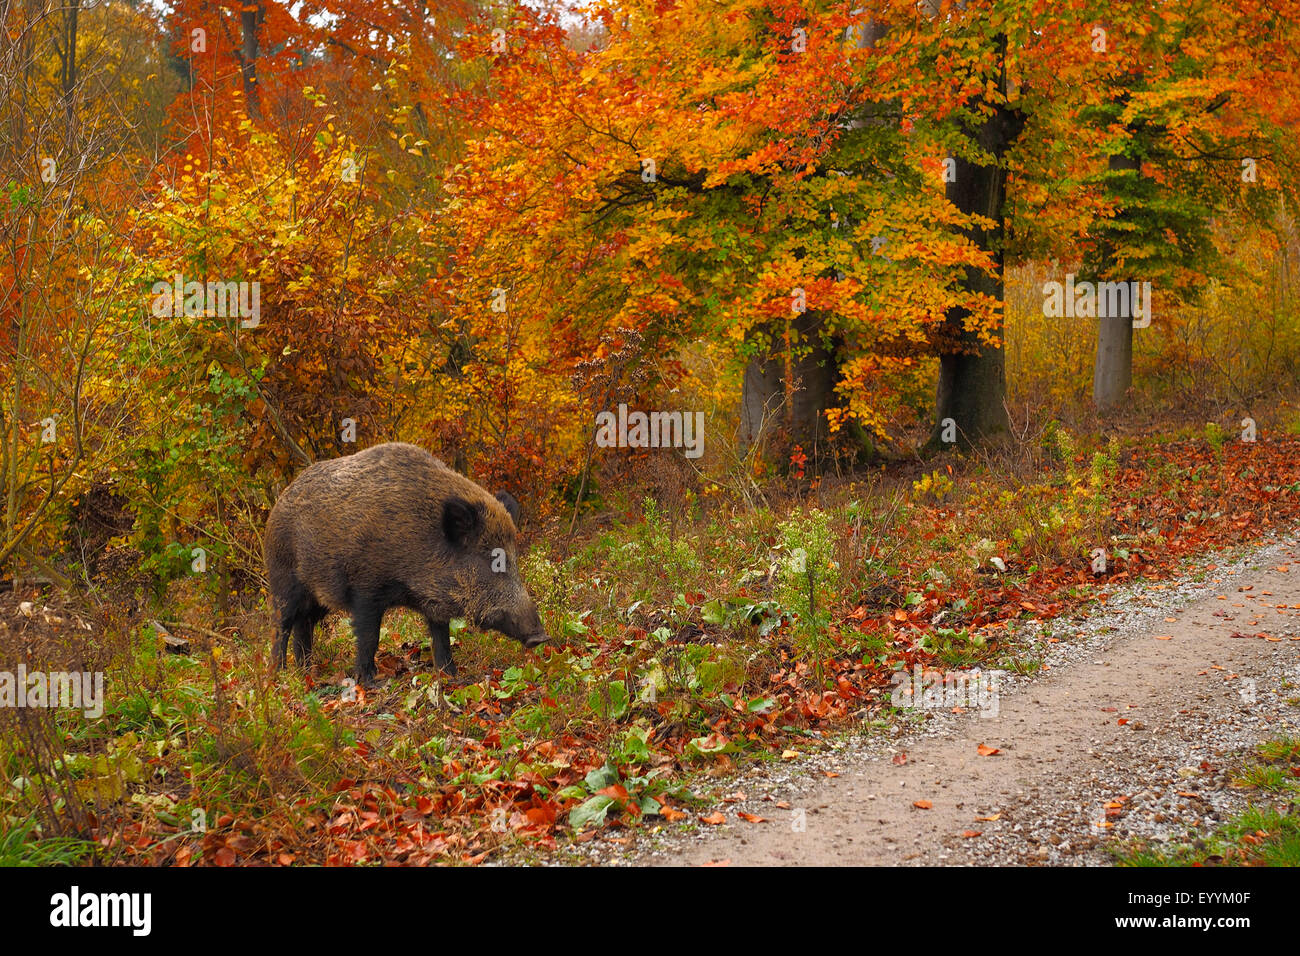 wild boar, pig, wild boar (Sus scrofa), wild sow standing at a forest path in autumn, Germany, Baden-Wuerttemberg Stock Photo